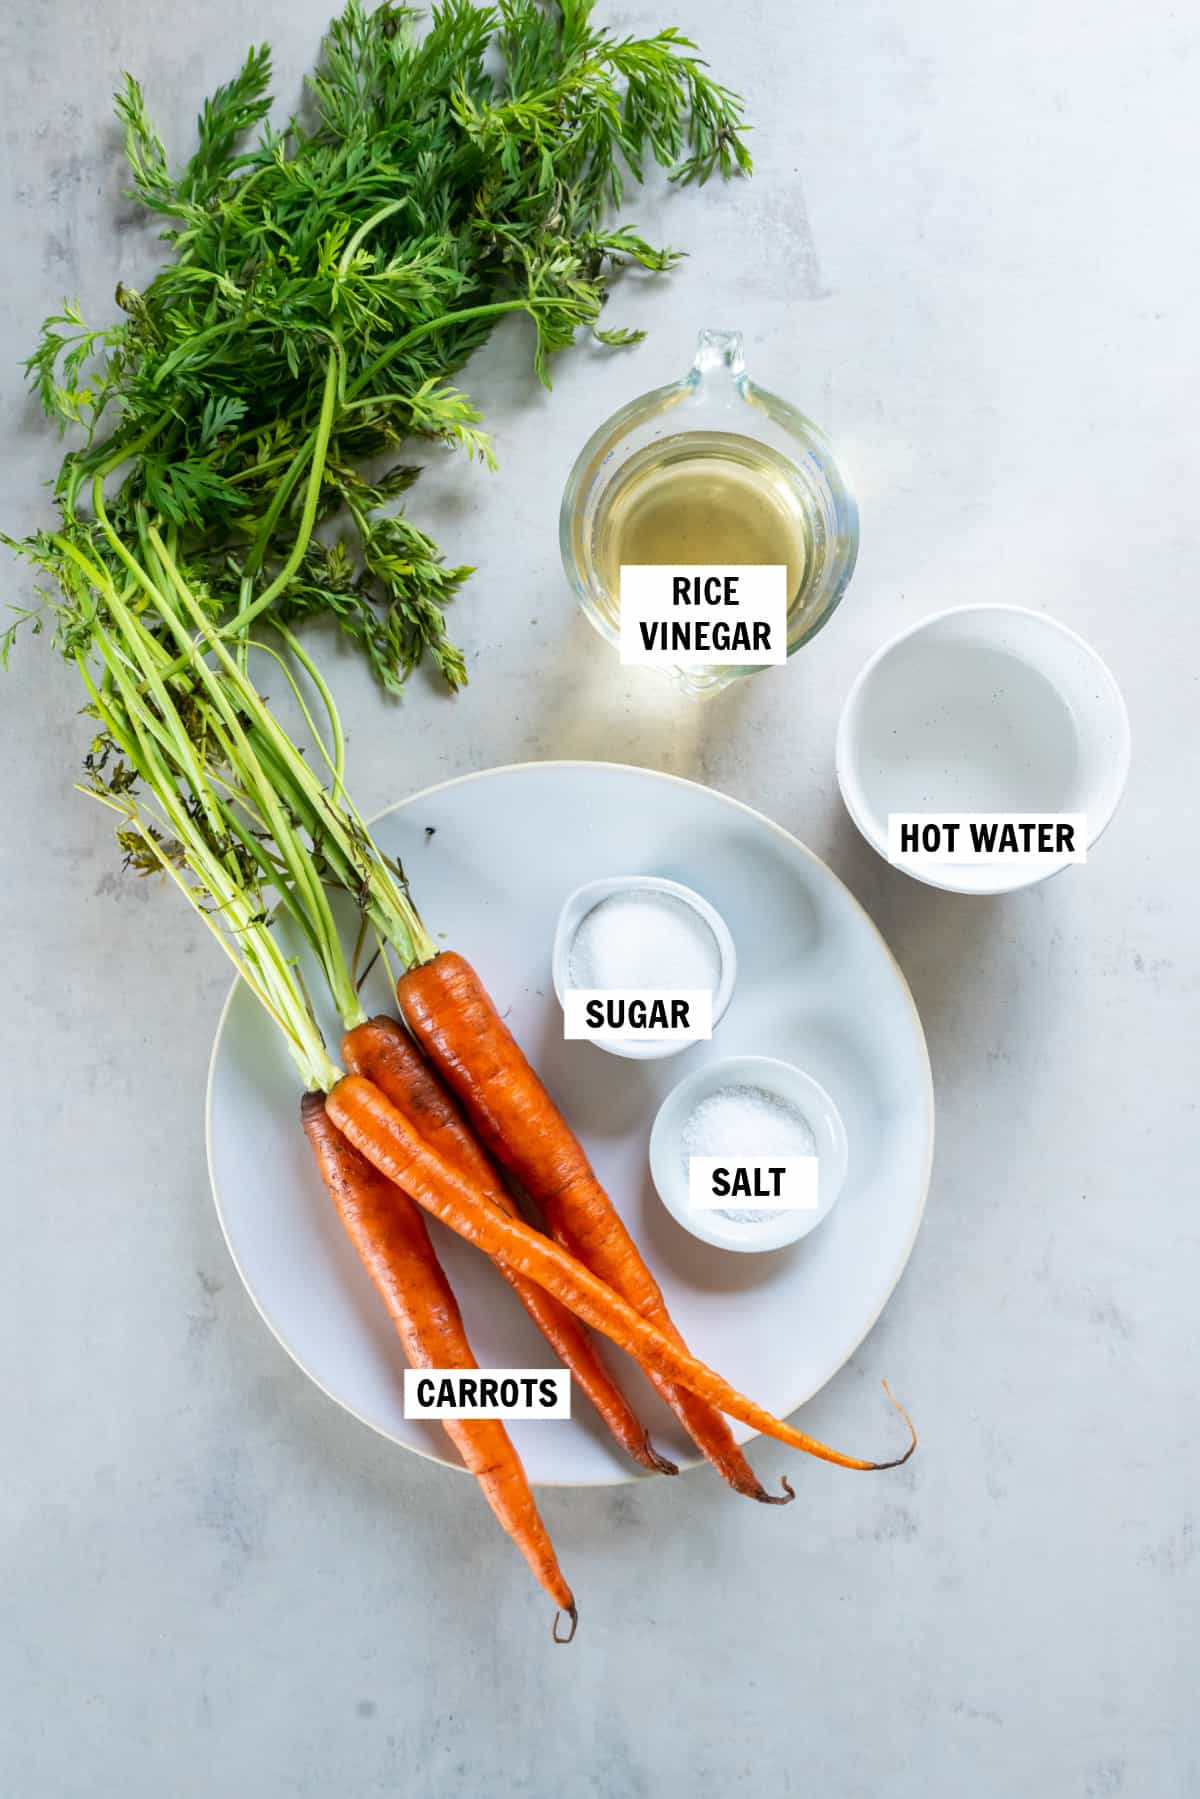 All of the ingredients for pickled carrots on a white countertop including carrots, hot water, rice vinegar, sugar and salt.